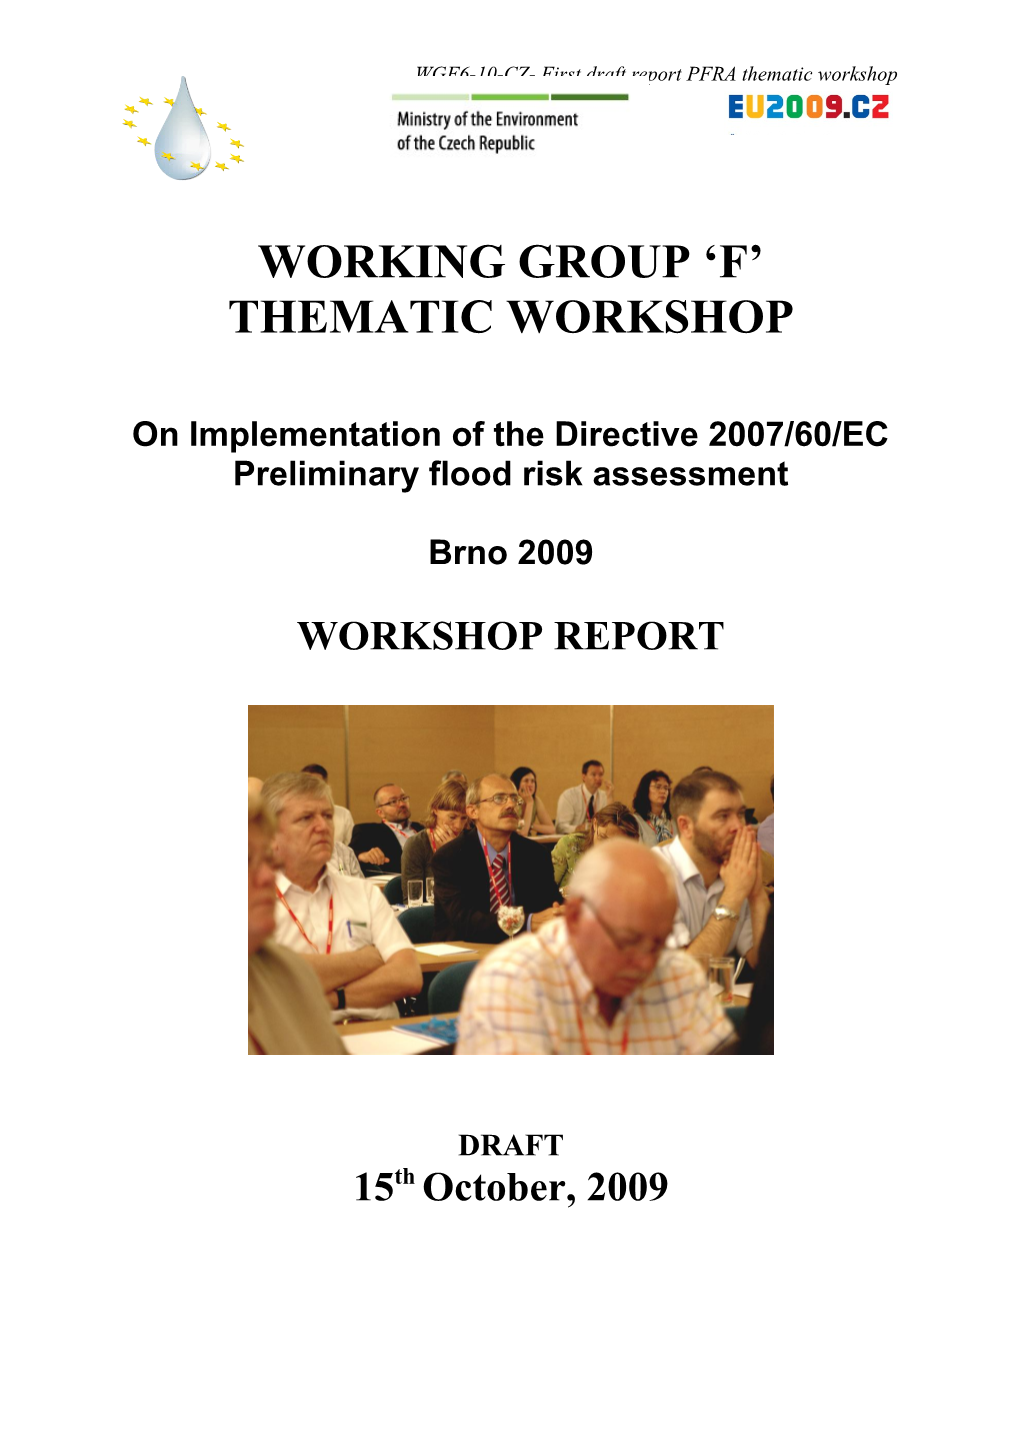 WGF6-10-CZ- First Draft Report PFRA Thematic Workshop